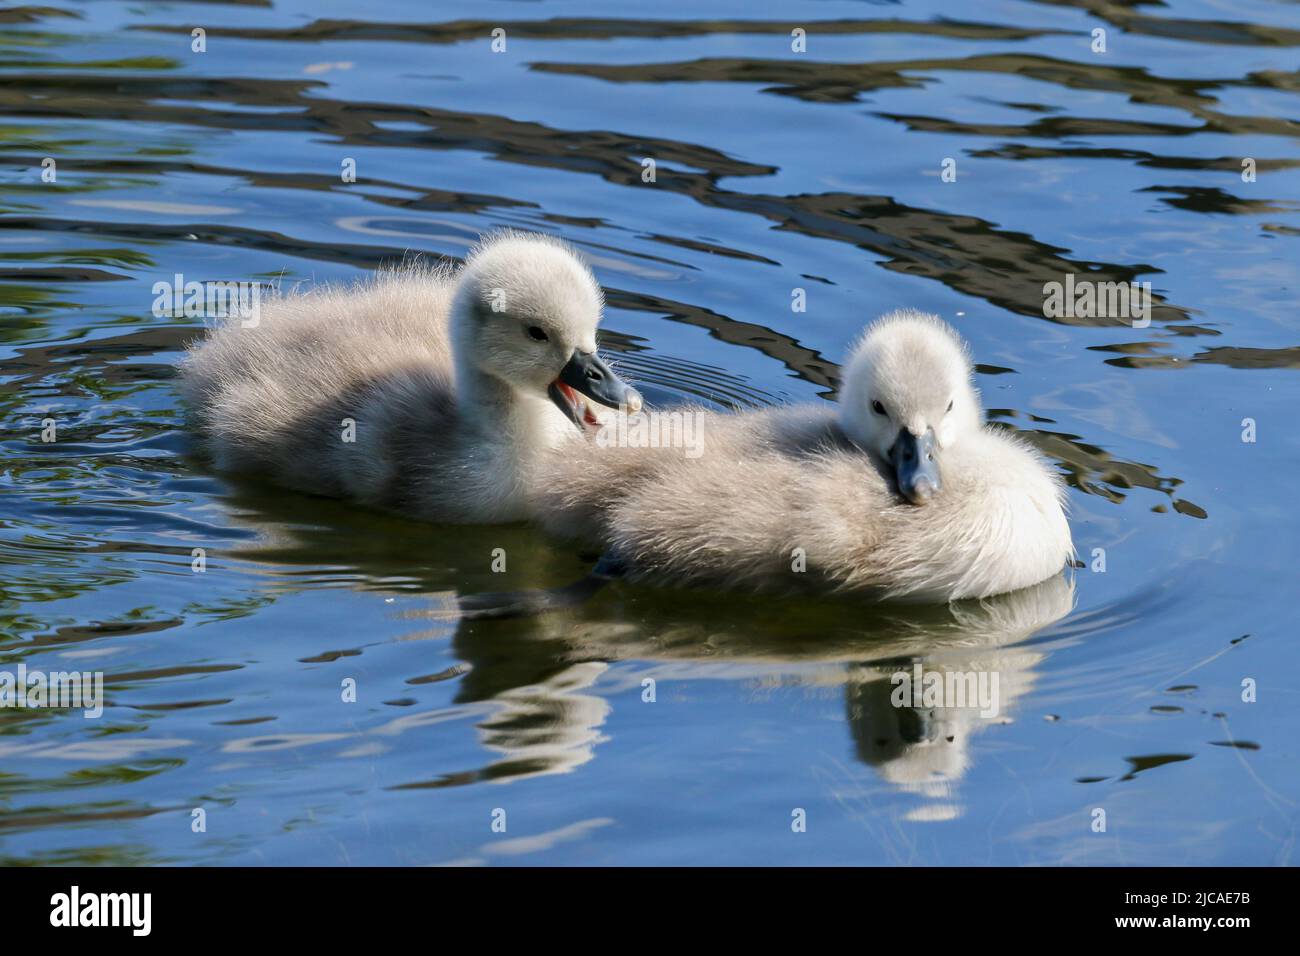 Two swan chicks or cygnets swimming on water of canal. Cute fluffy baby swans with soft down. Ripples in waters. Grand Canal, Dublin, Ireland Stock Photo